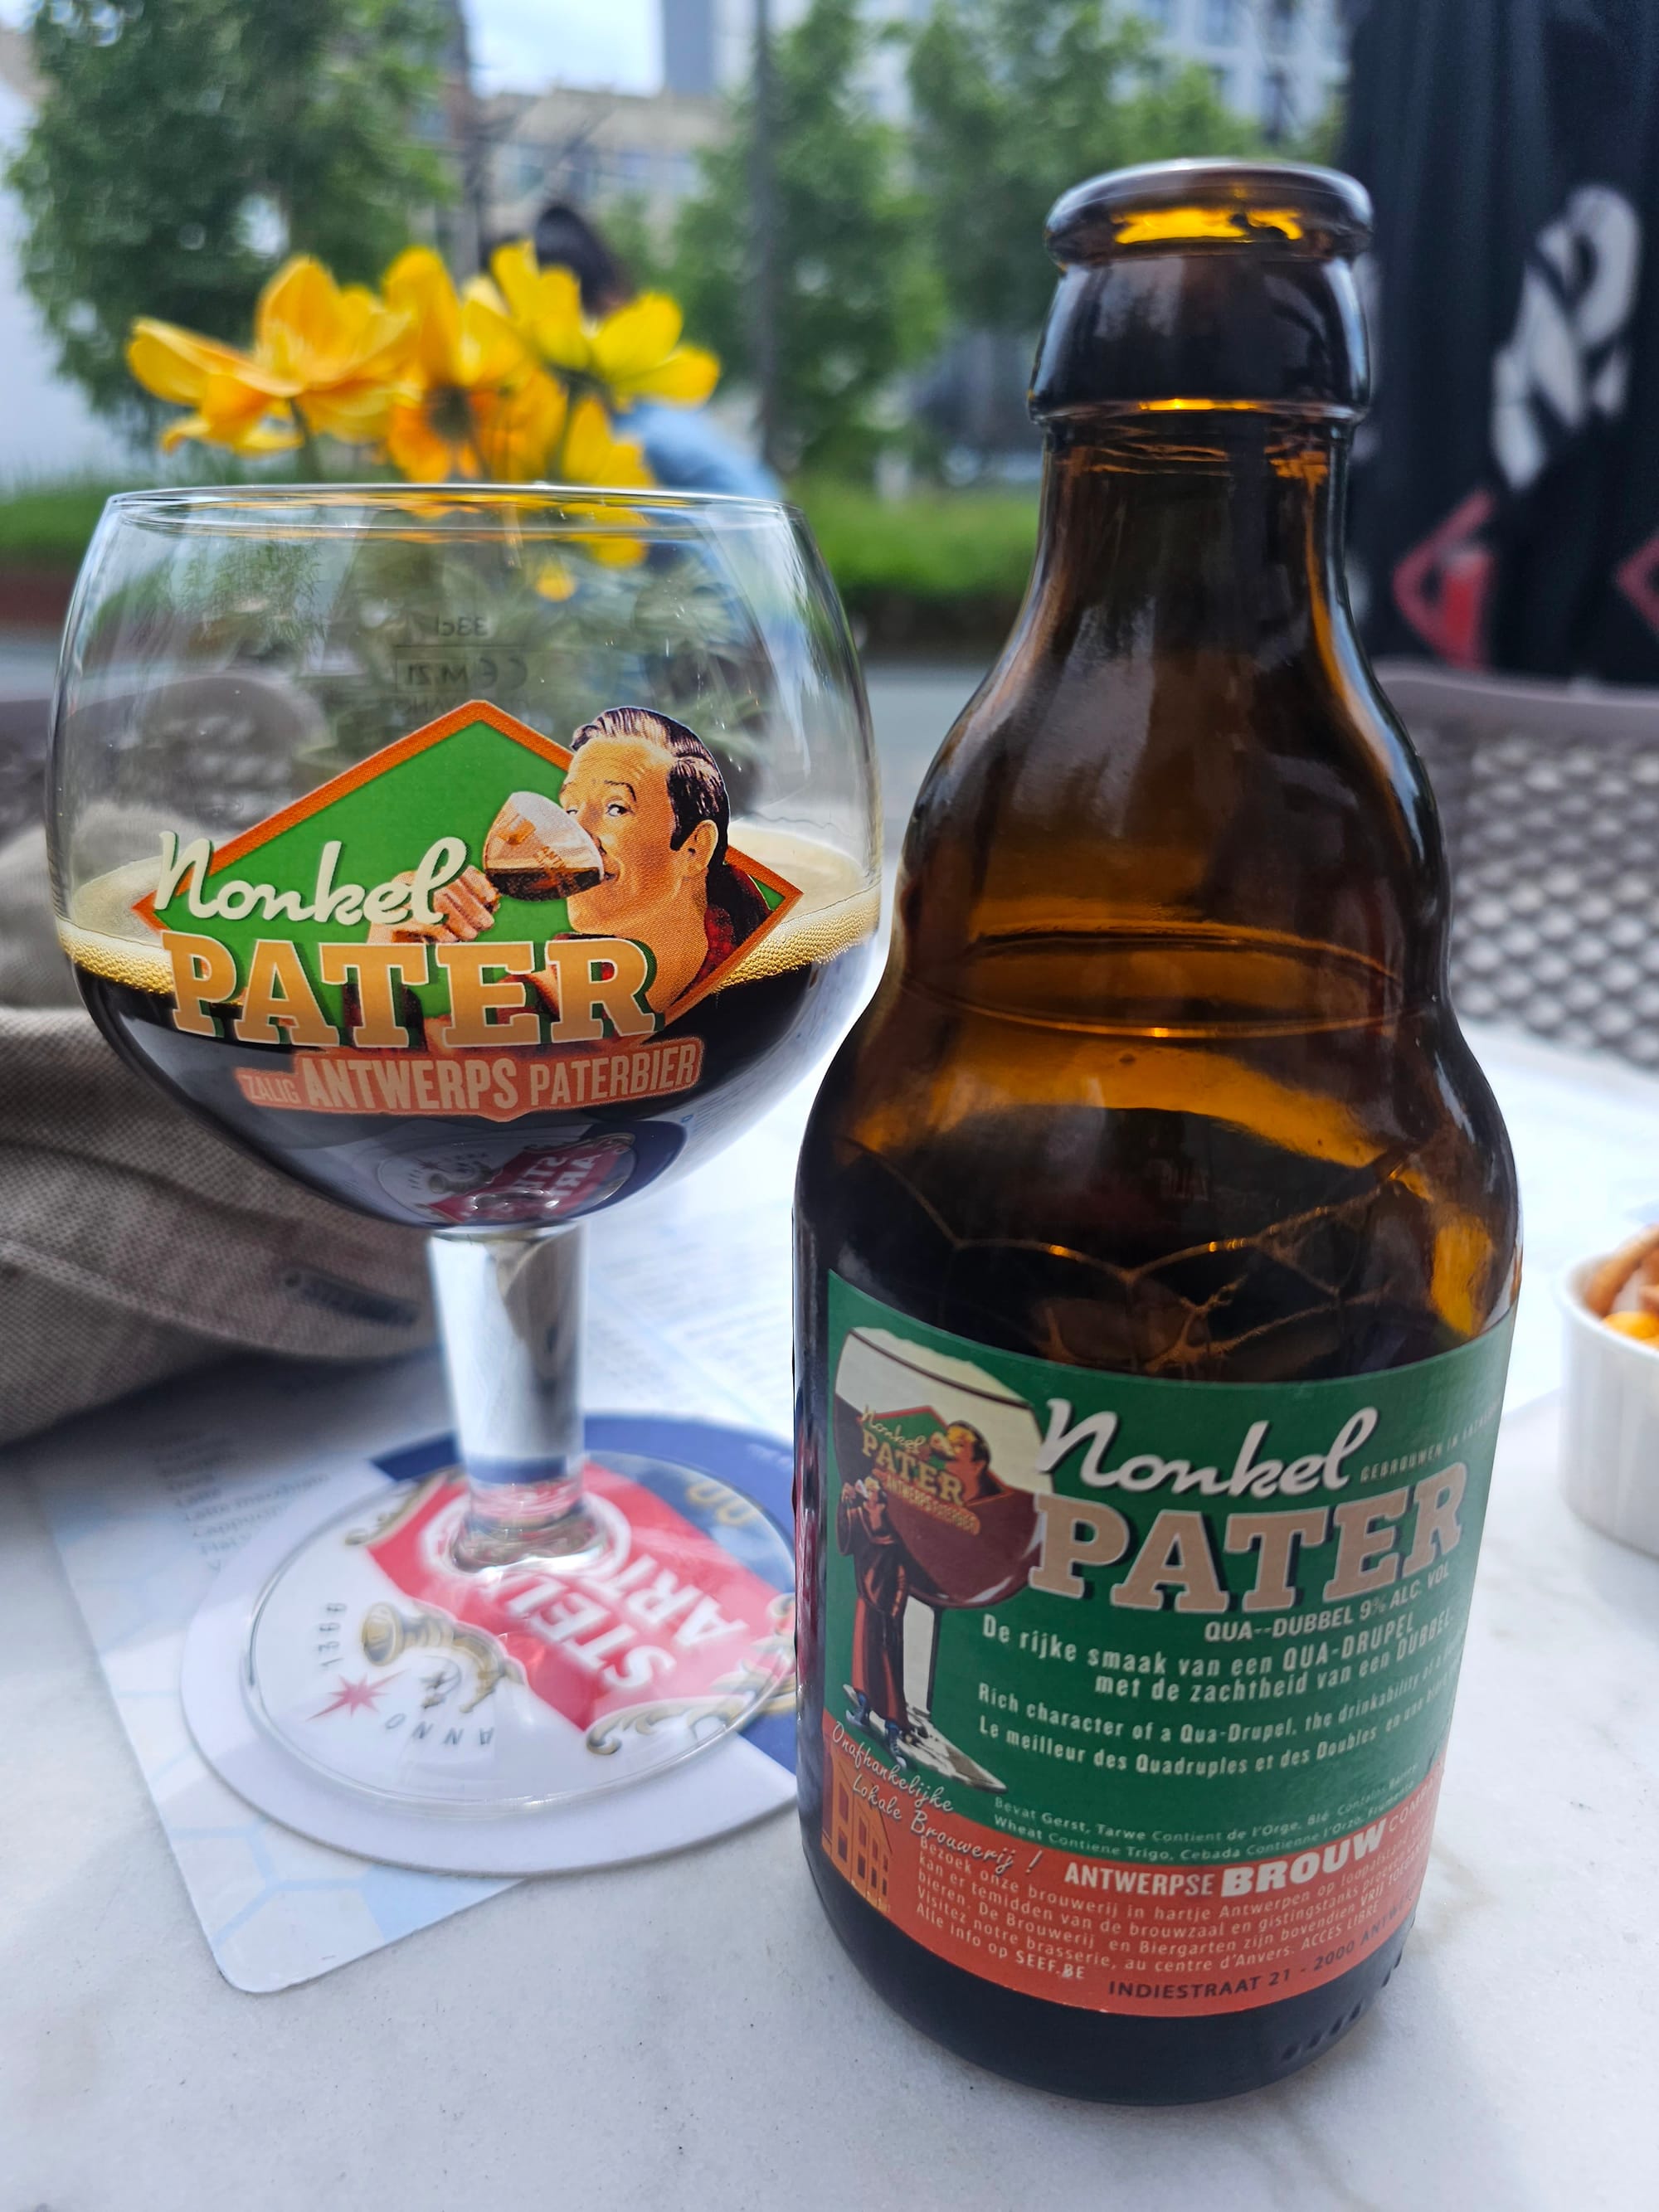 A bottle of Nonkel Pater Antwerp beer, with a half filled glass next to it 